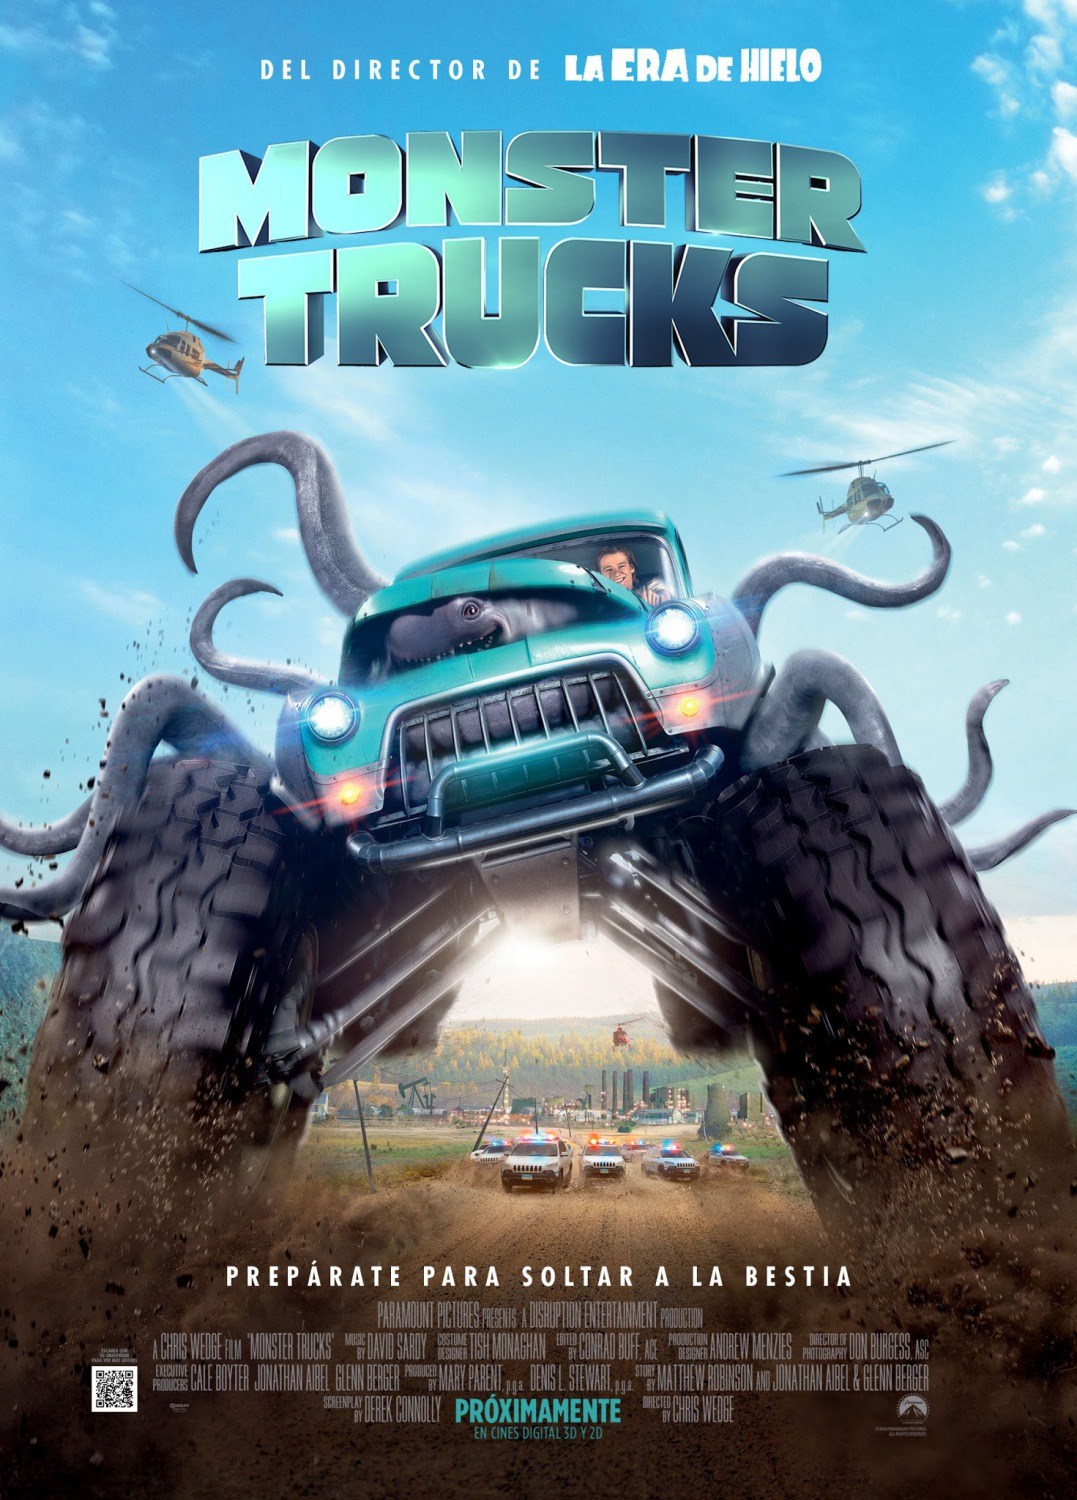 Where to Watch Interview with Chris Wedge of “Monster Trucks”